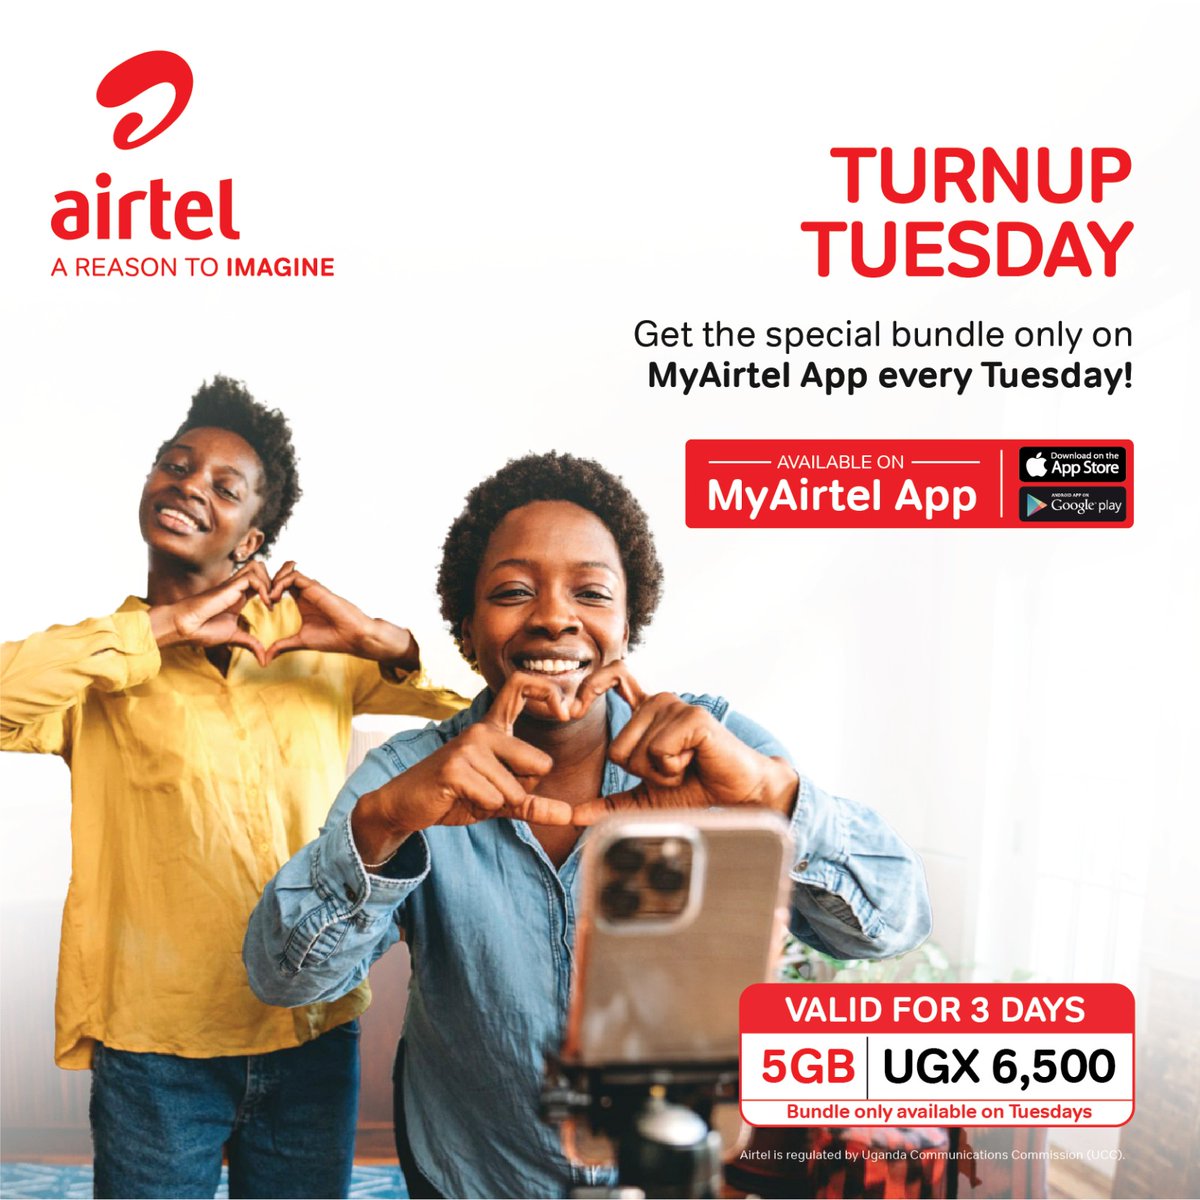 Hey UOX, Get special bundles designed for you and yours truly, Get 5Gb for 6,500 valid for 3 days while using the #MyAirtelApp enjoy the rest of your week with your friends and relatives. Use this link airtelafrica.onelink.me/cGyr/qgj4qeu2 #TurnUpTuesday